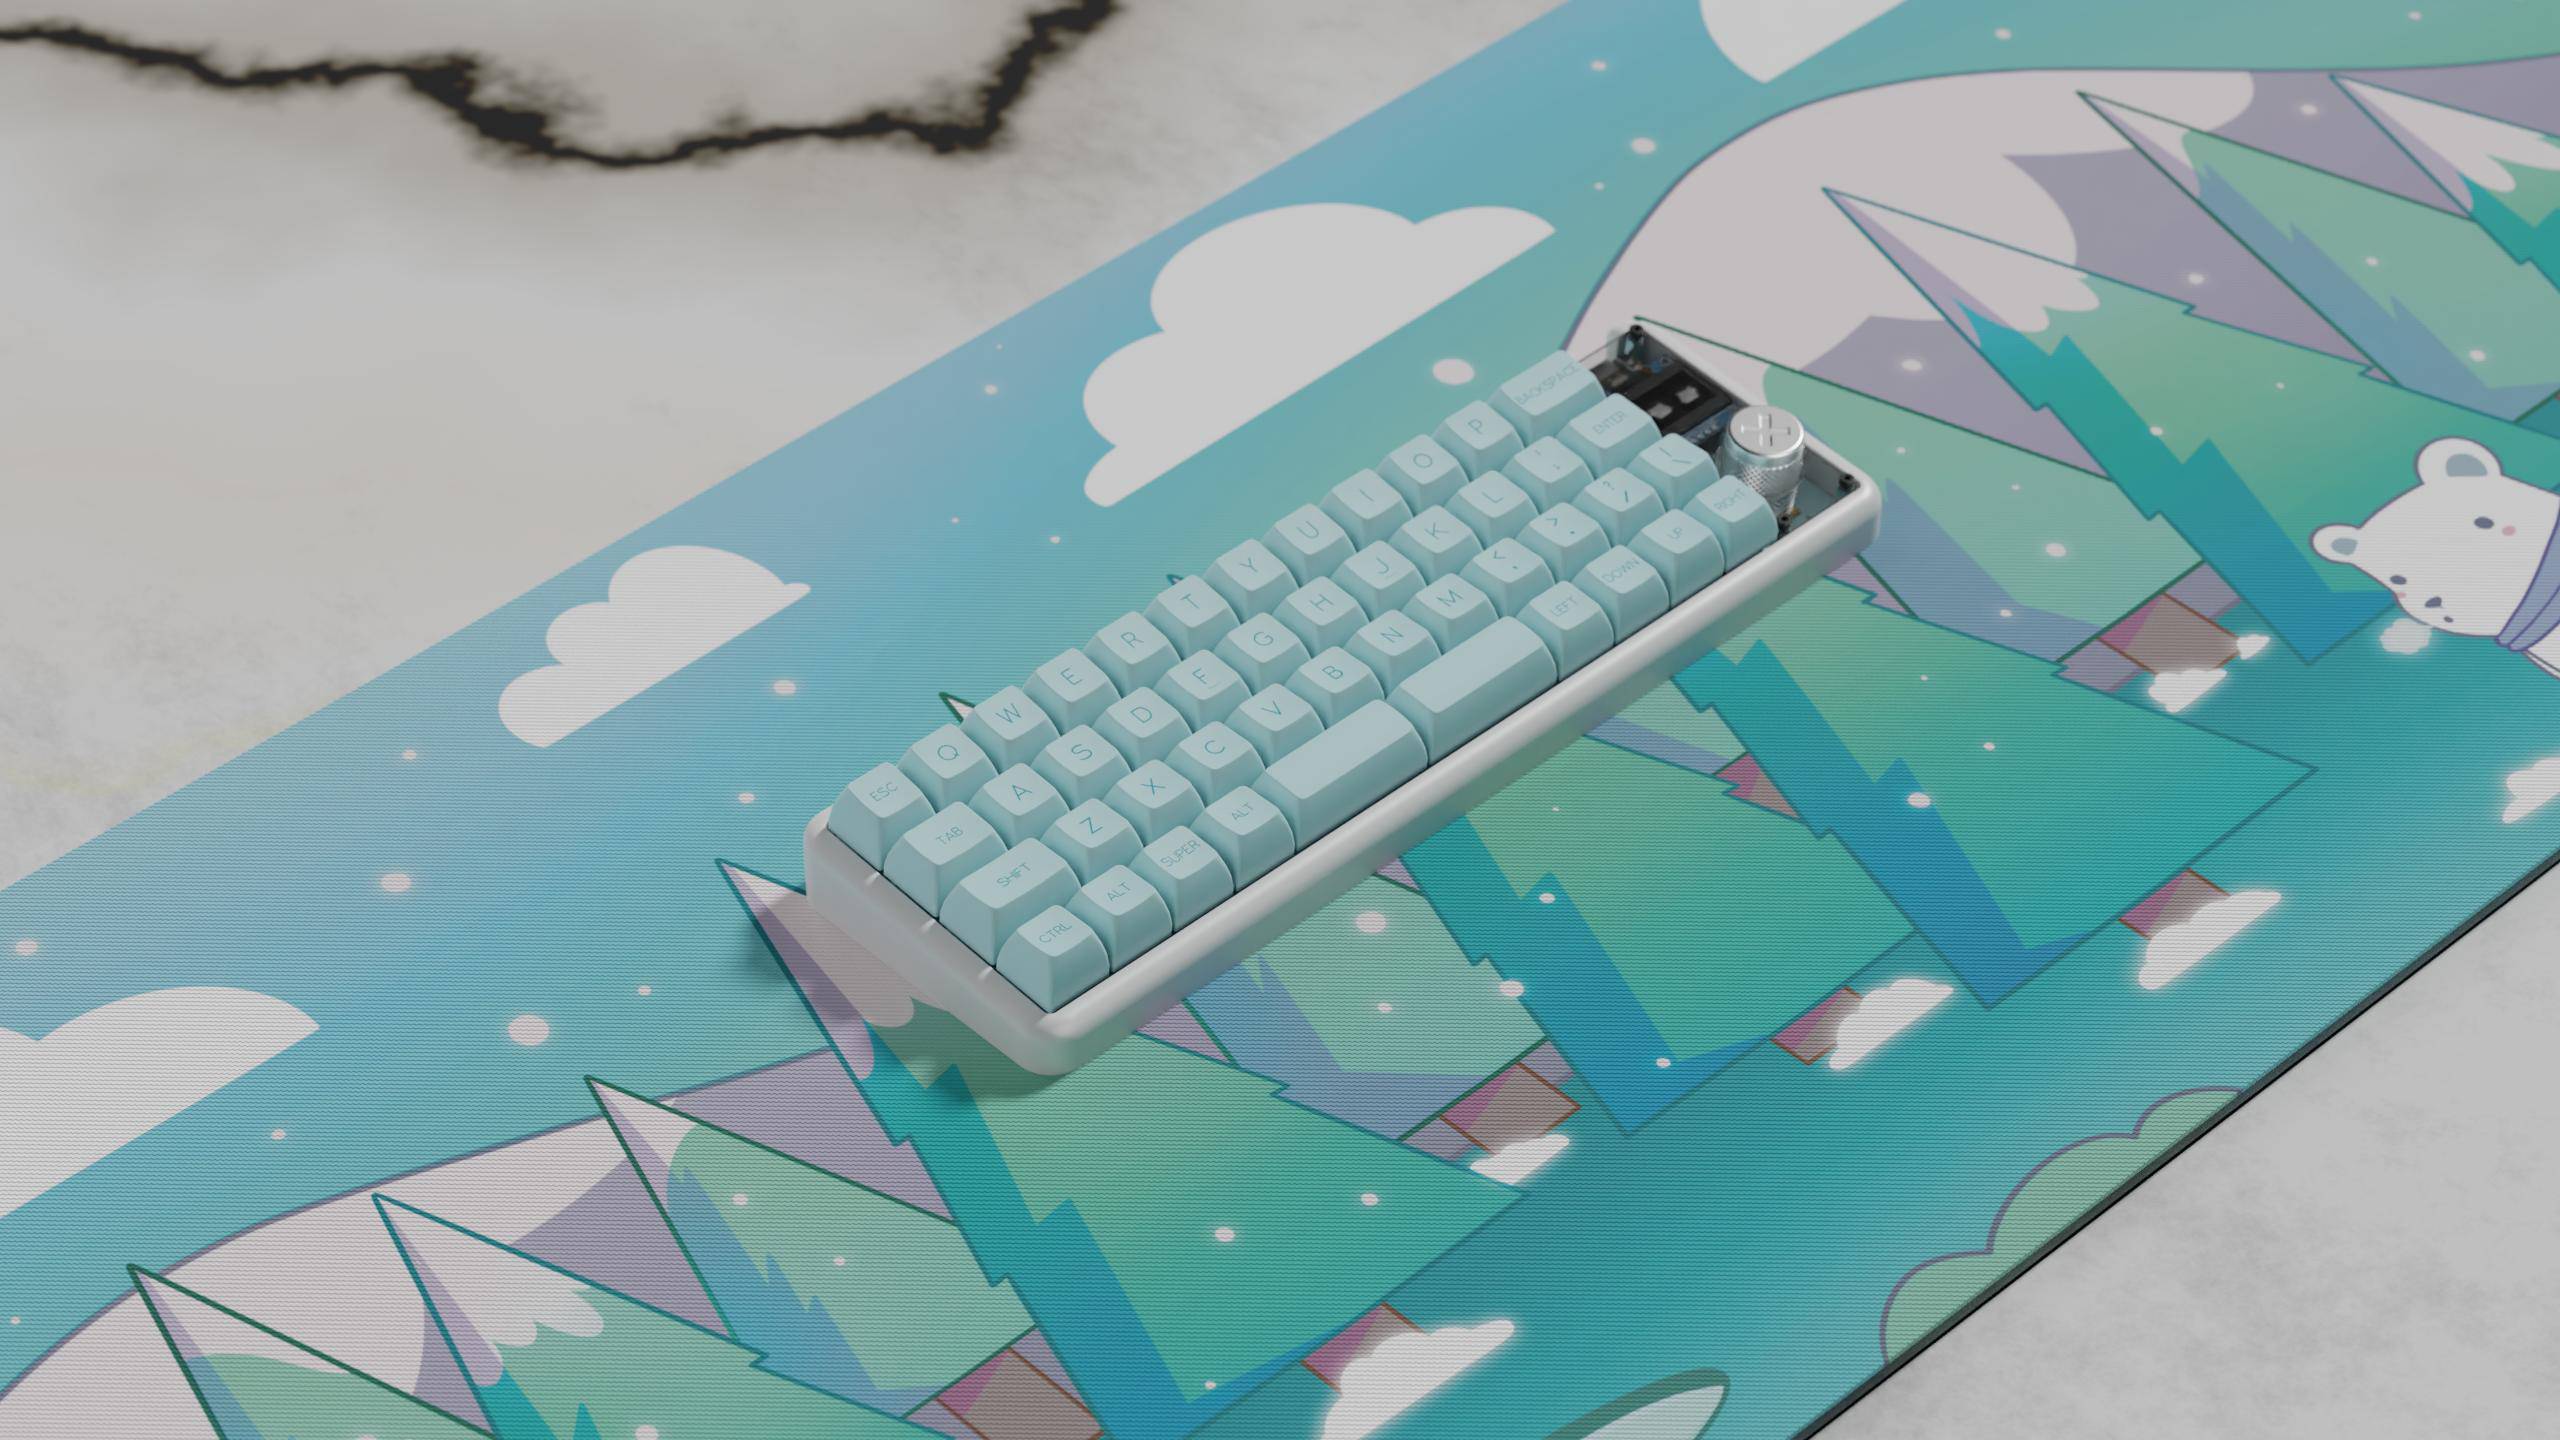 Bored Bear Deskmat with angled keyboard proxied by KeebsForAll